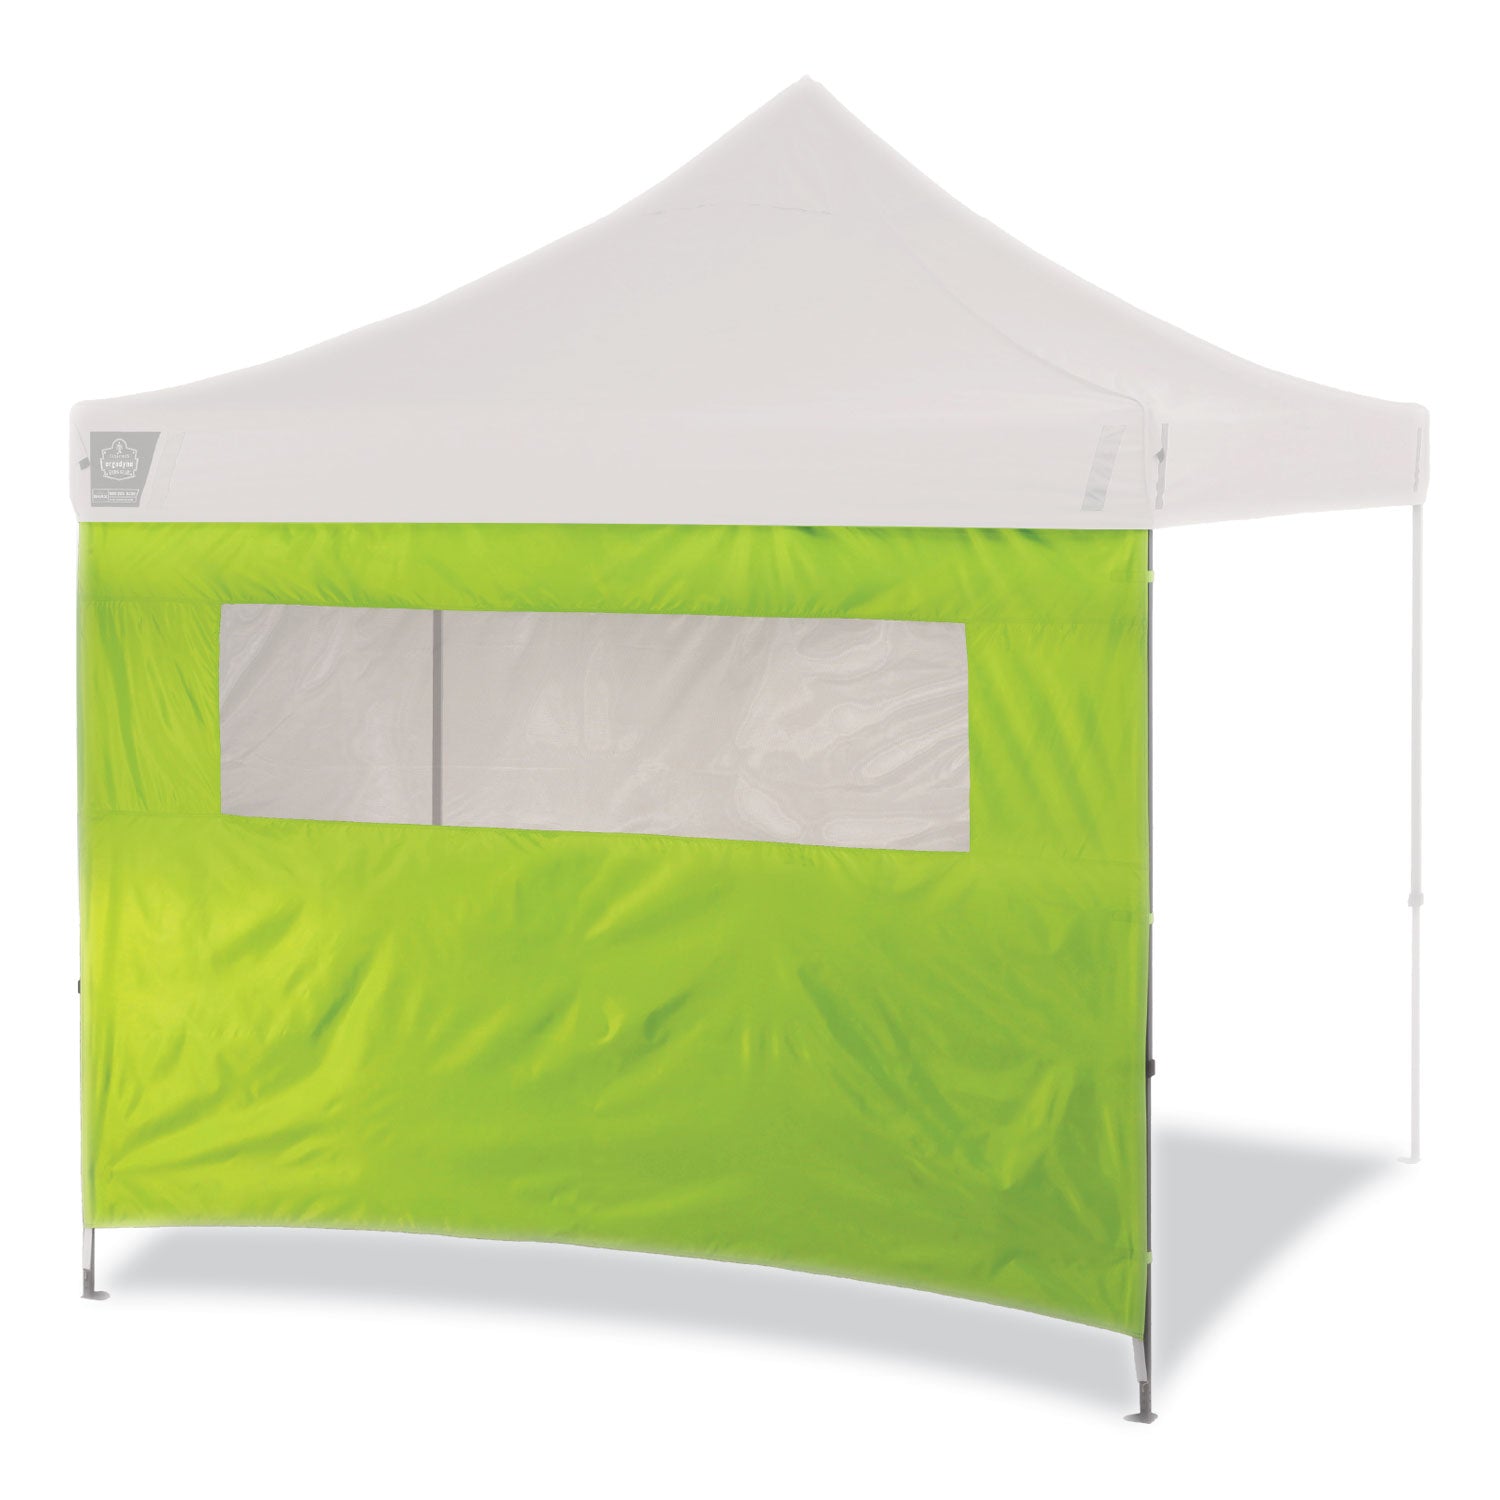 shax-6092-pop-up-tent-sidewall-with-mesh-window-single-skin-10-ft-x-10-ft-polyester-lime-ships-in-1-3-business-days_ego12989 - 1